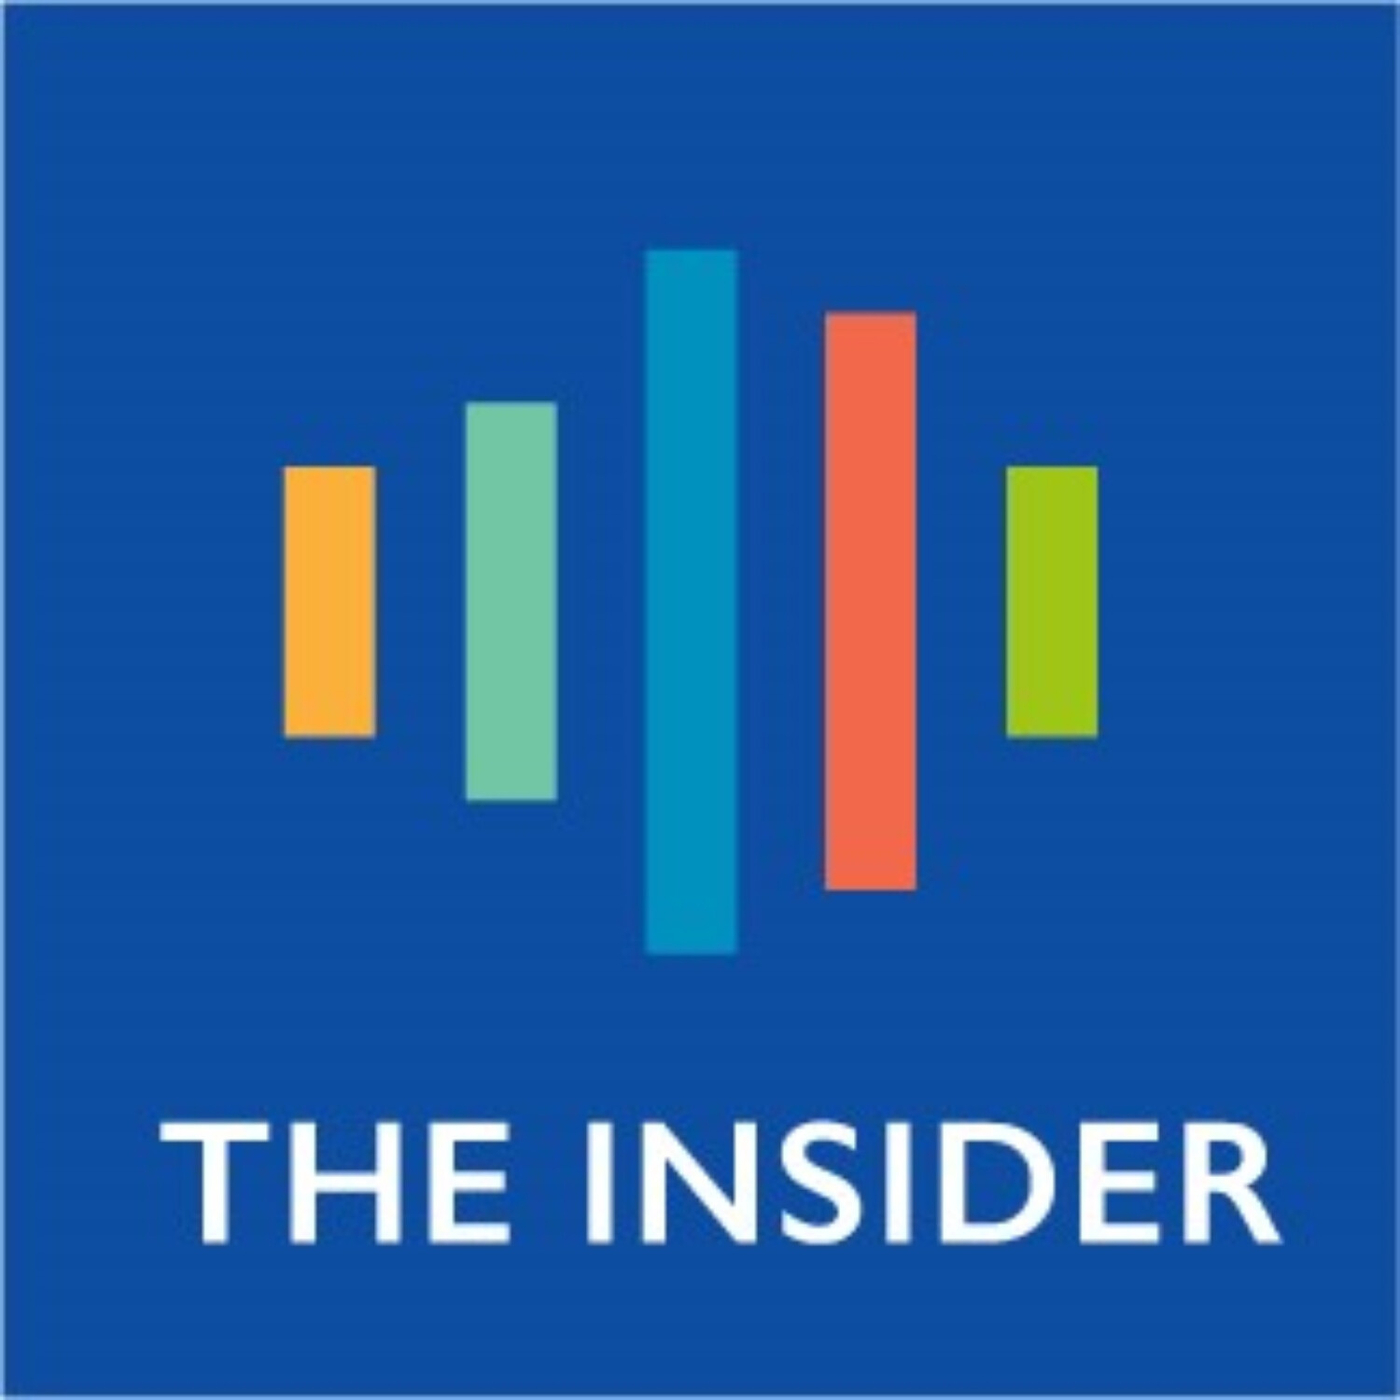 The Insider - Podcast.co